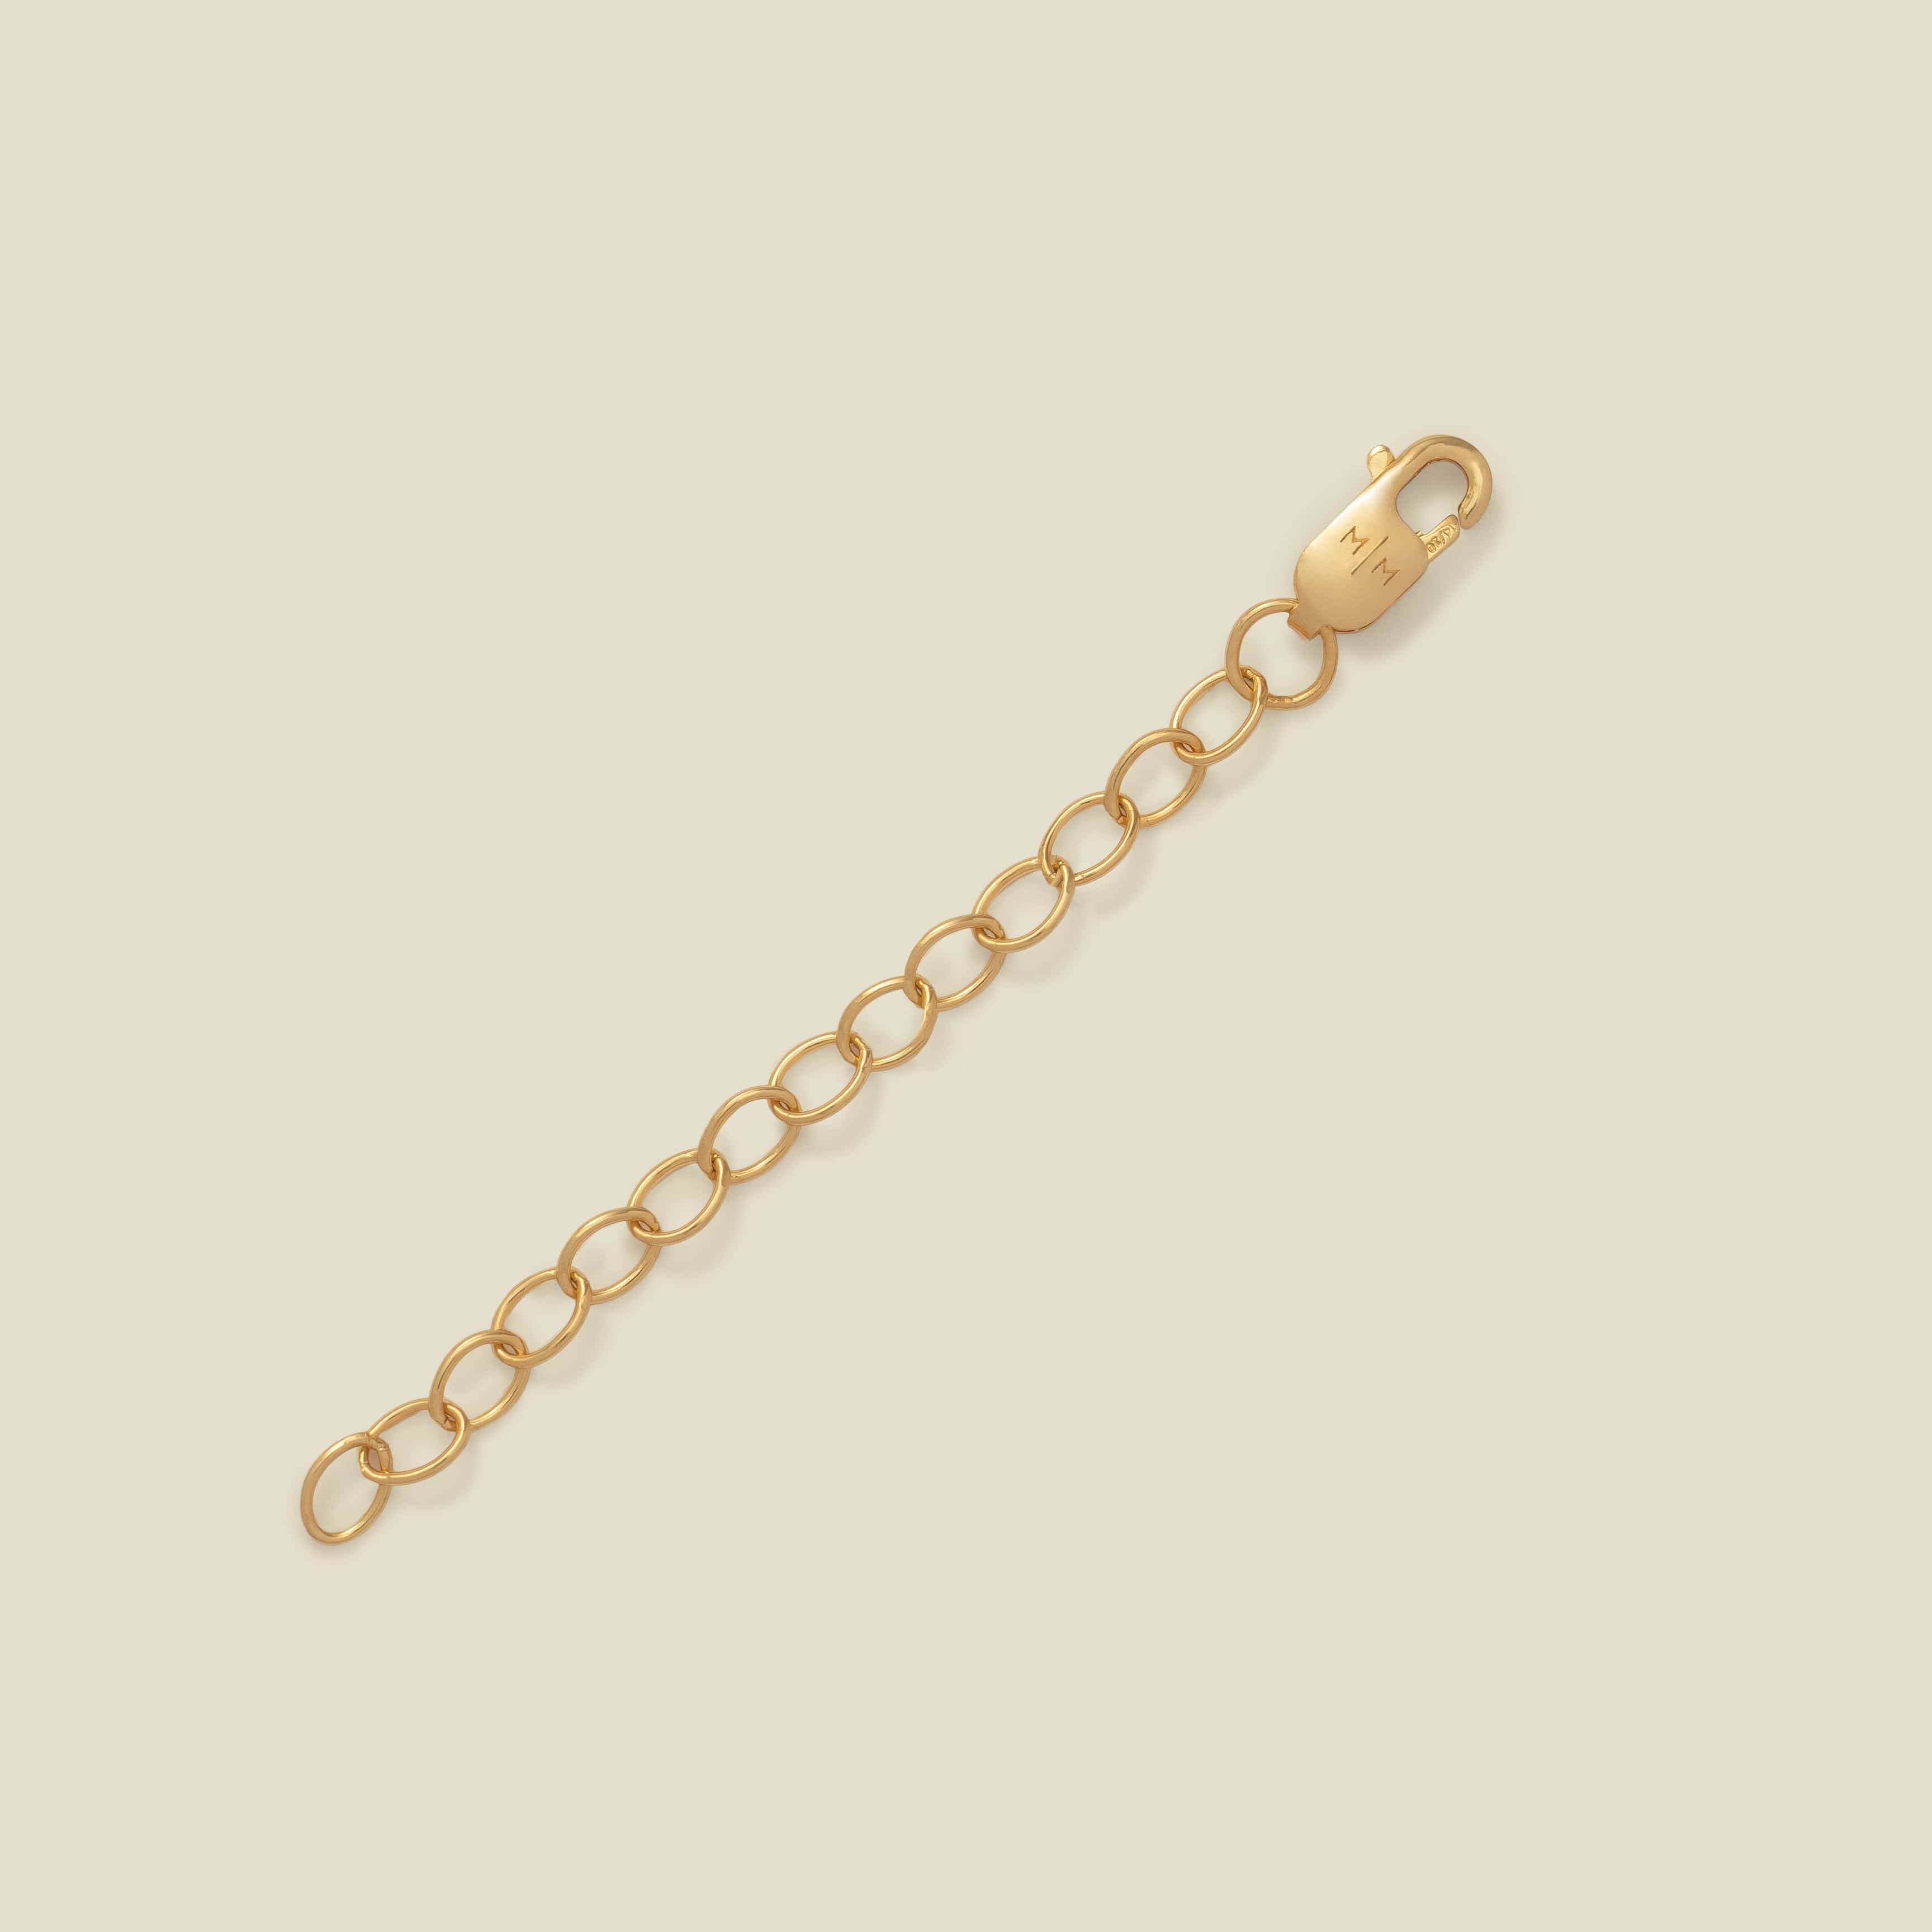 Detachable Chain Extender Add-on Gold Filled / 2.0" Add Ons